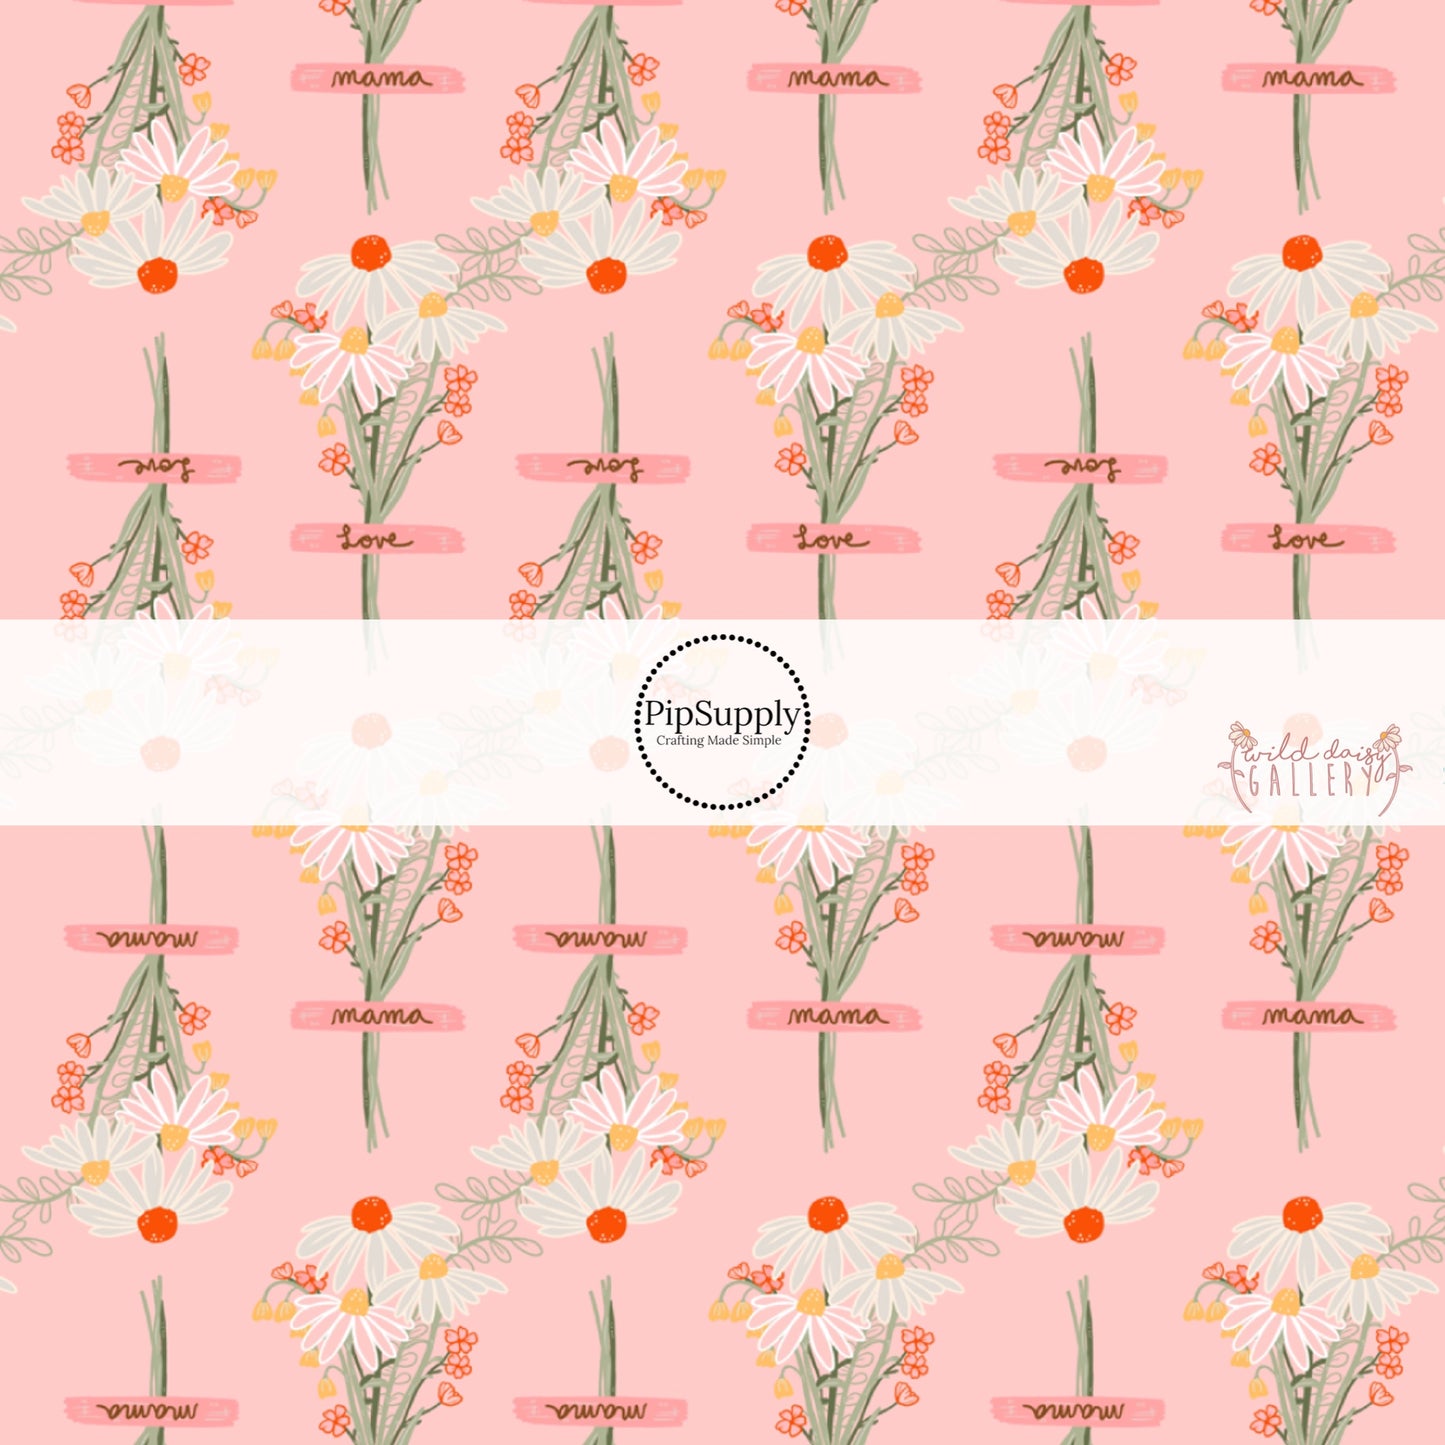 These wildflower daisy themed light pink fabric by the yard features white, cream, yellow, and orange daisy flower bouquets with pink ribbons. 